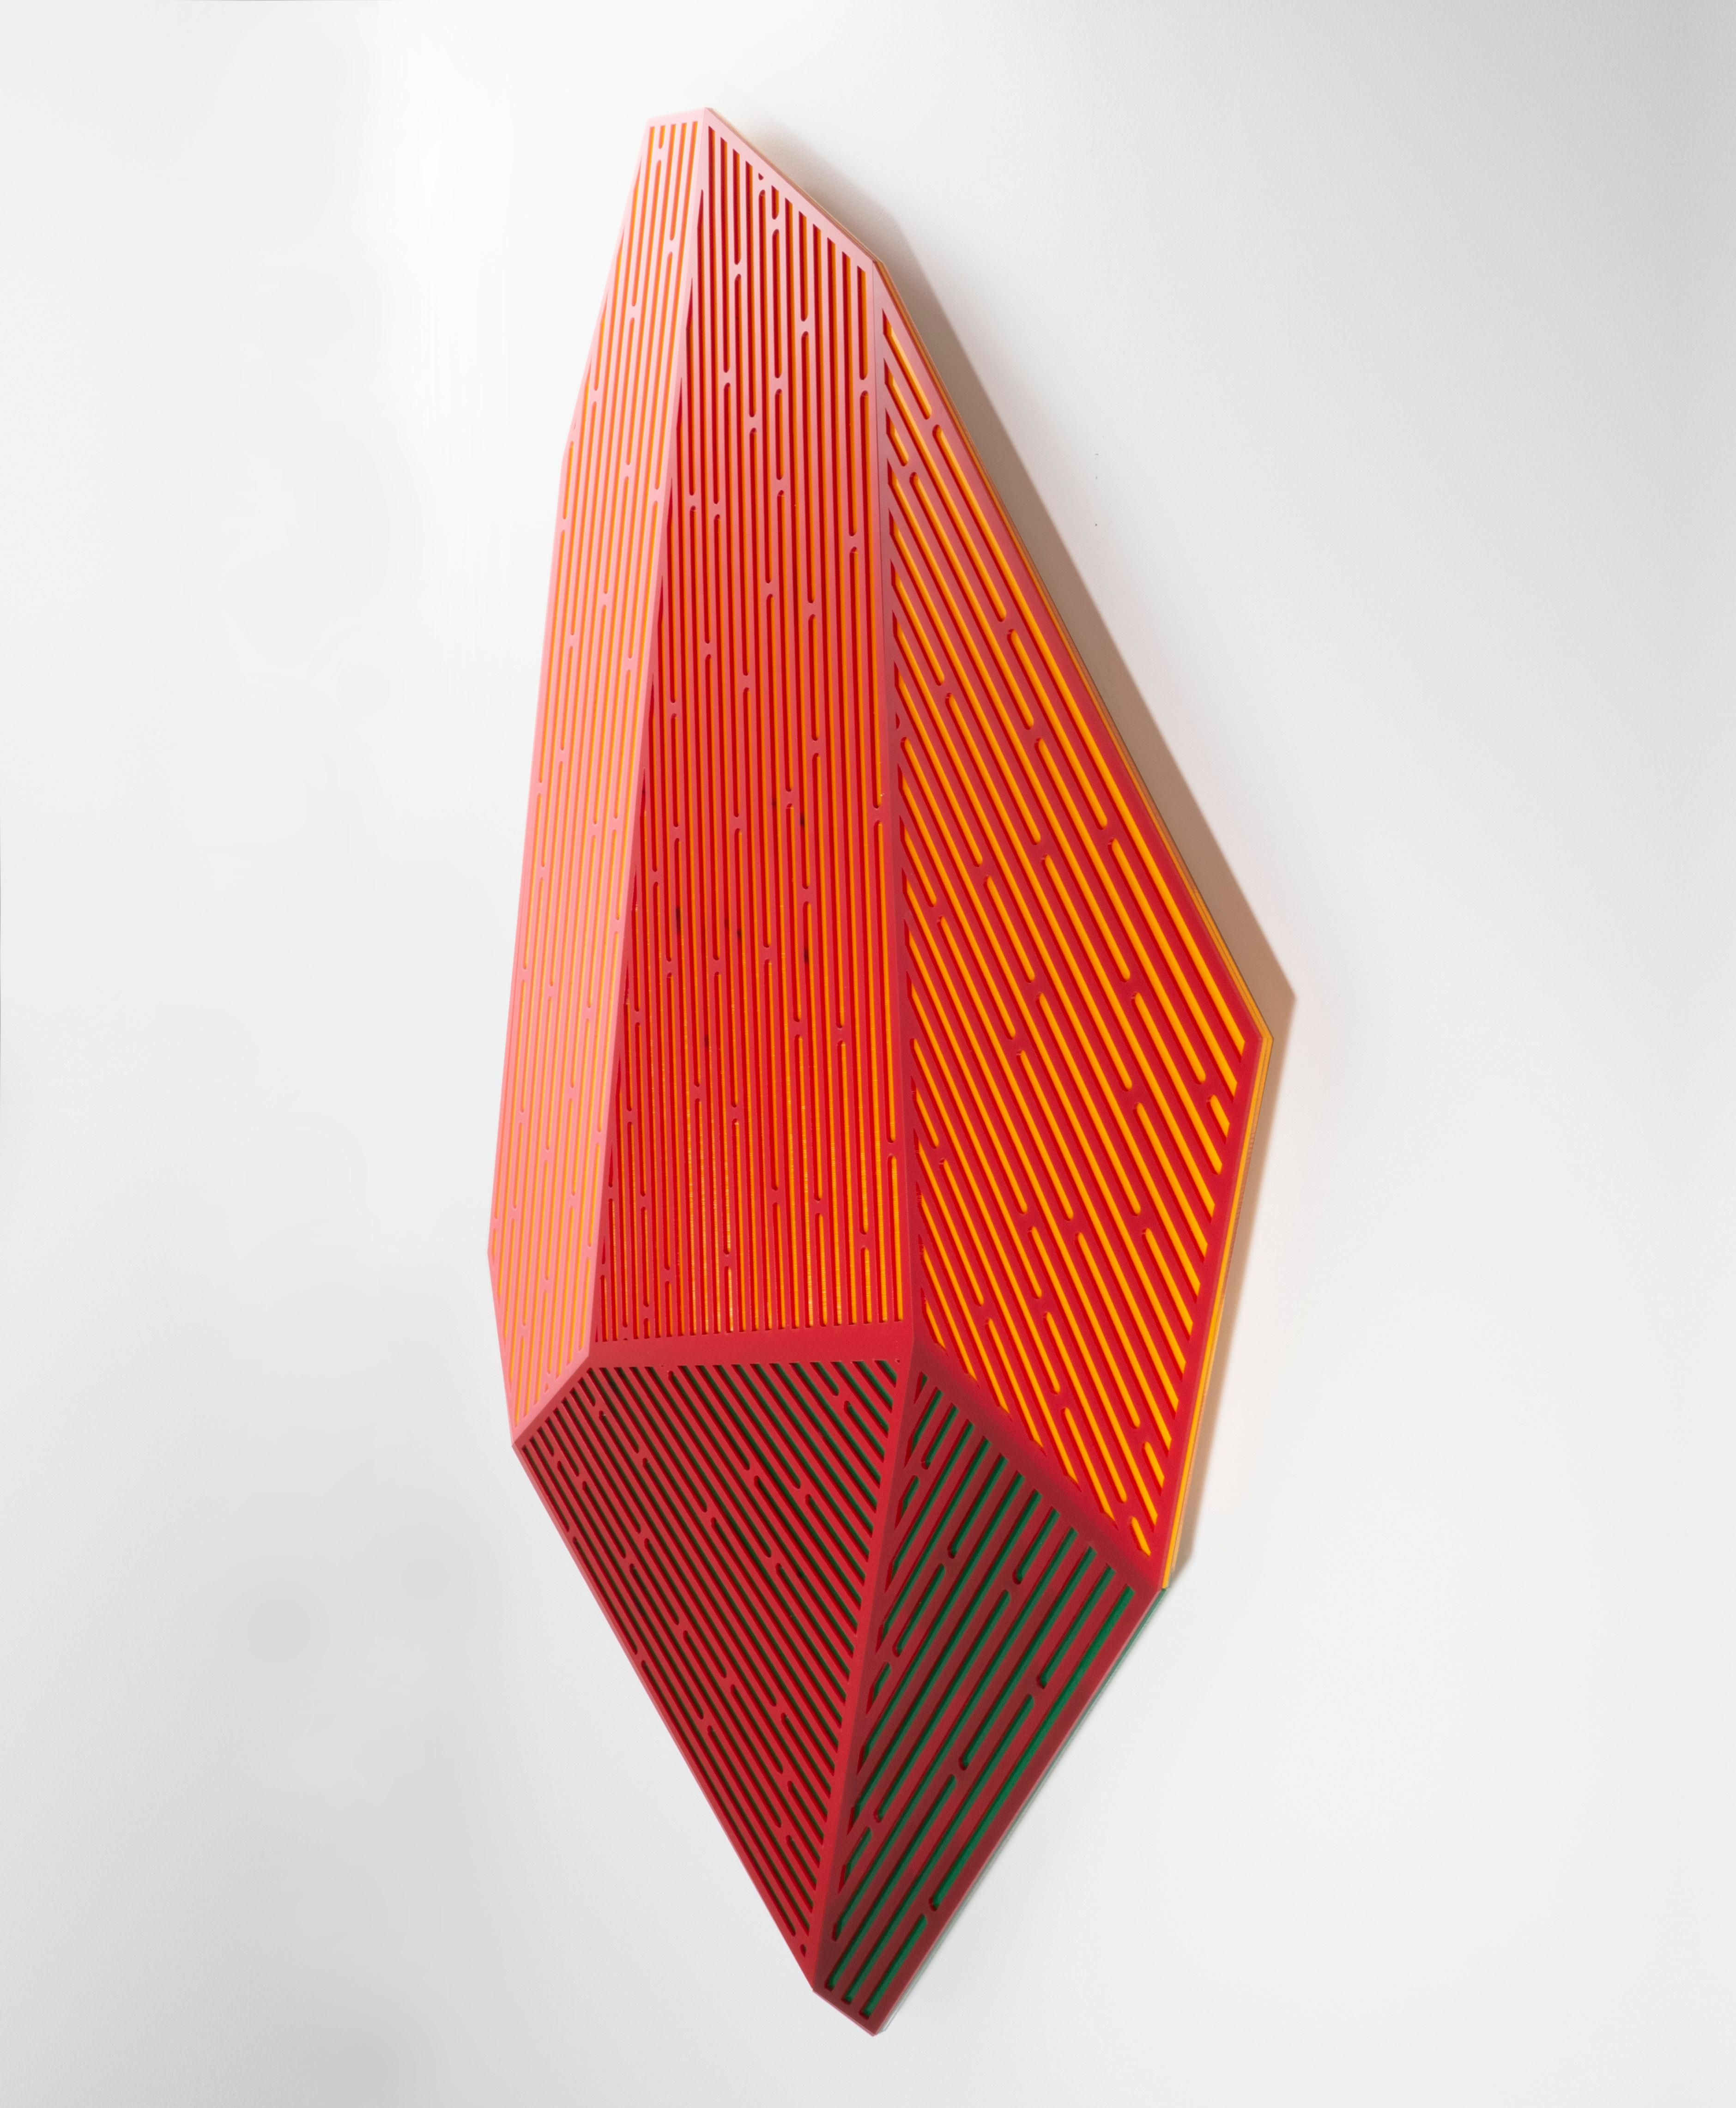 Prismatic Polygon IV: geometric abstract wall-mounted sculpture in red & orange - White Figurative Sculpture by Jay Walker